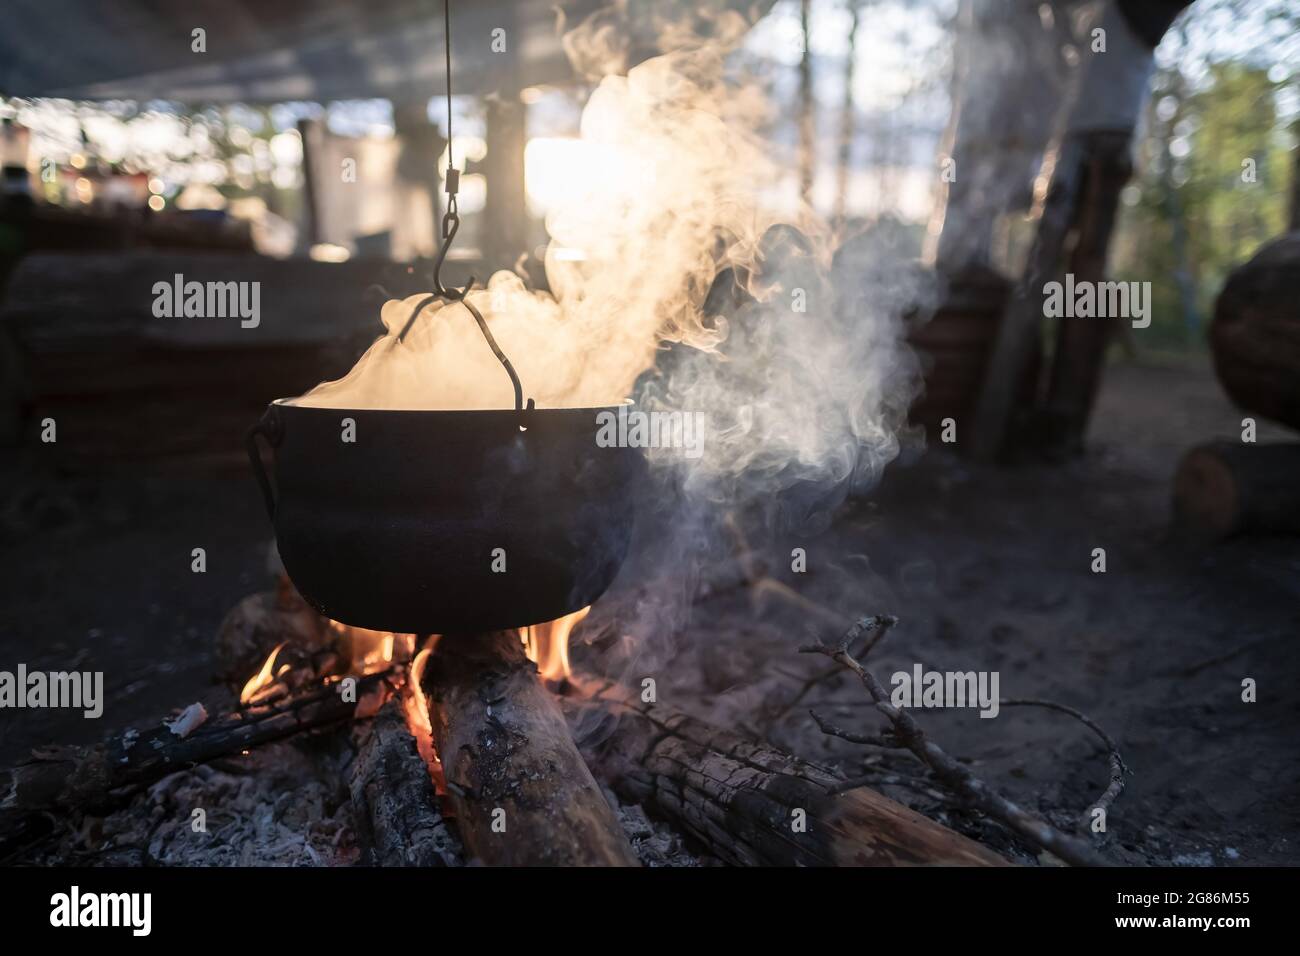 Bowler with escaping steam hangs over a campfire, in which food is prepared, at sunset, against the backdrop of a lake. Stock Photo